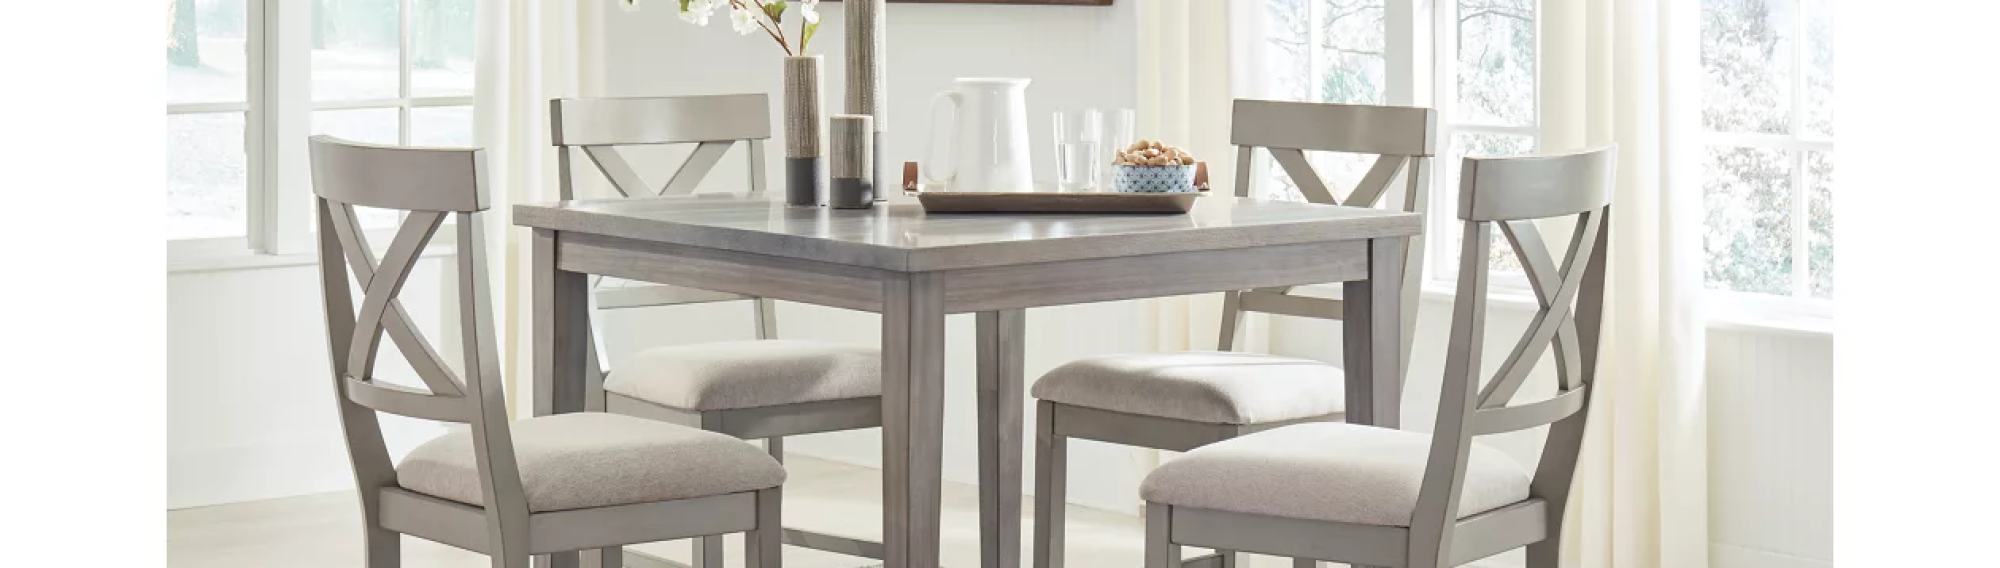 Header image of affordable dining room furniture from Superior Rent to Own